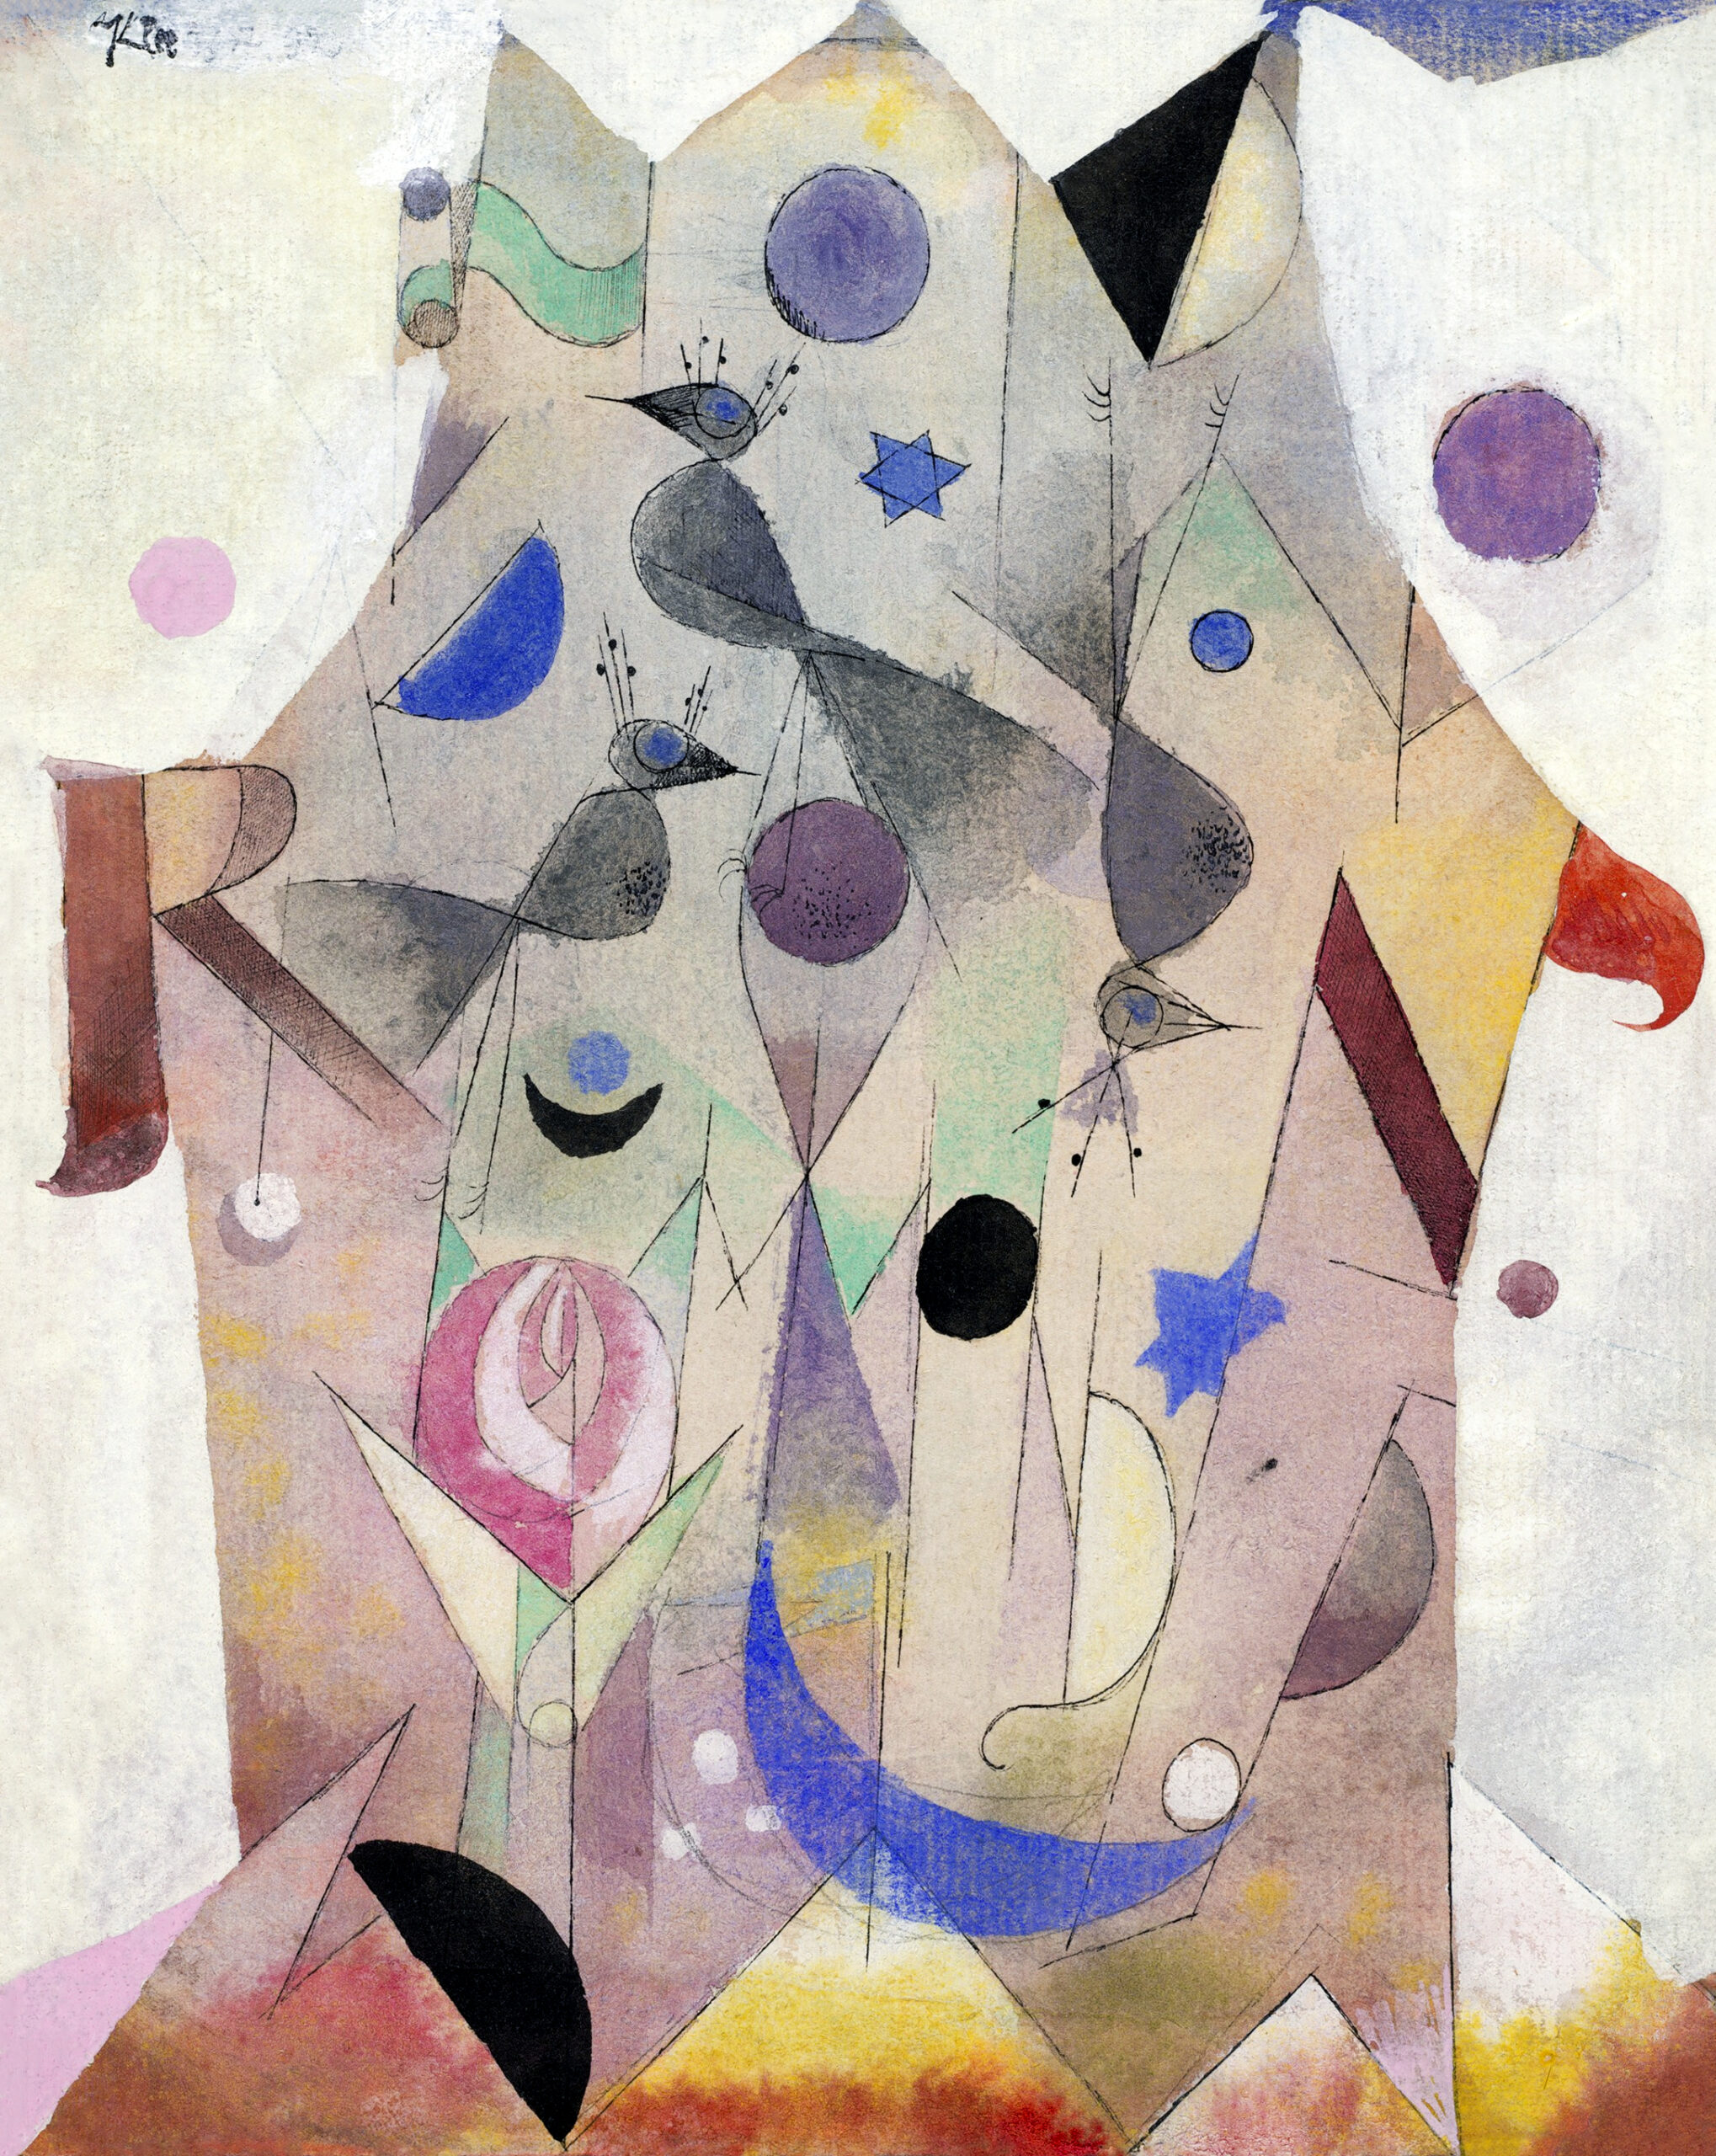 Persische Nachtigallen (Persian Nightingales) (1917) by Paul Klee. Original portrait painting from The Art Institute of Chicago.